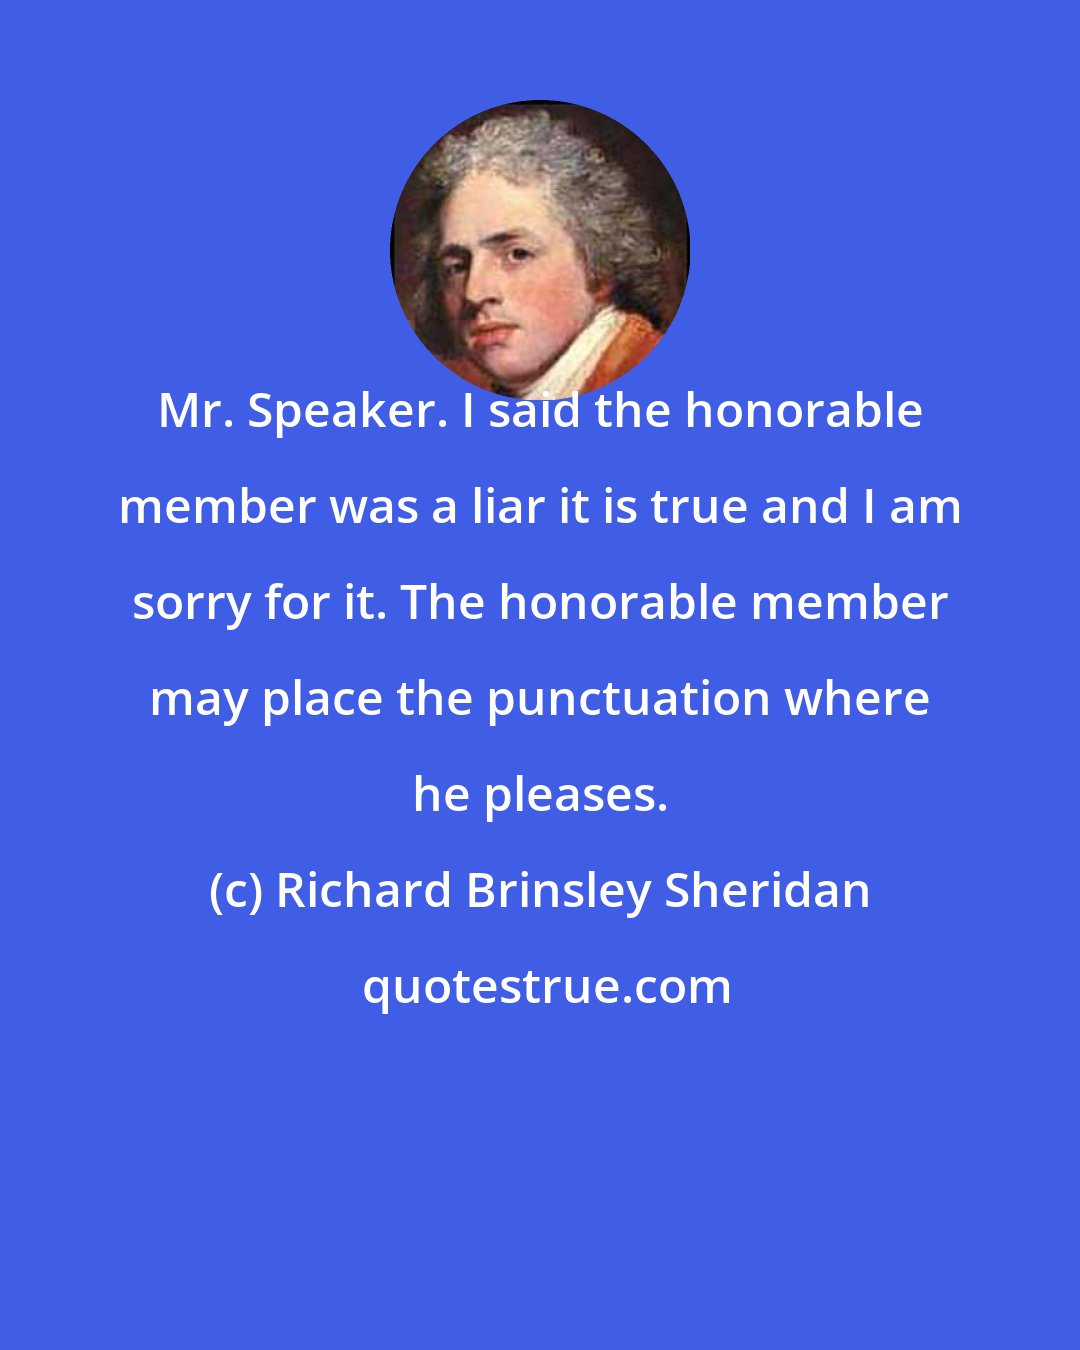 Richard Brinsley Sheridan: Mr. Speaker. I said the honorable member was a liar it is true and I am sorry for it. The honorable member may place the punctuation where he pleases.